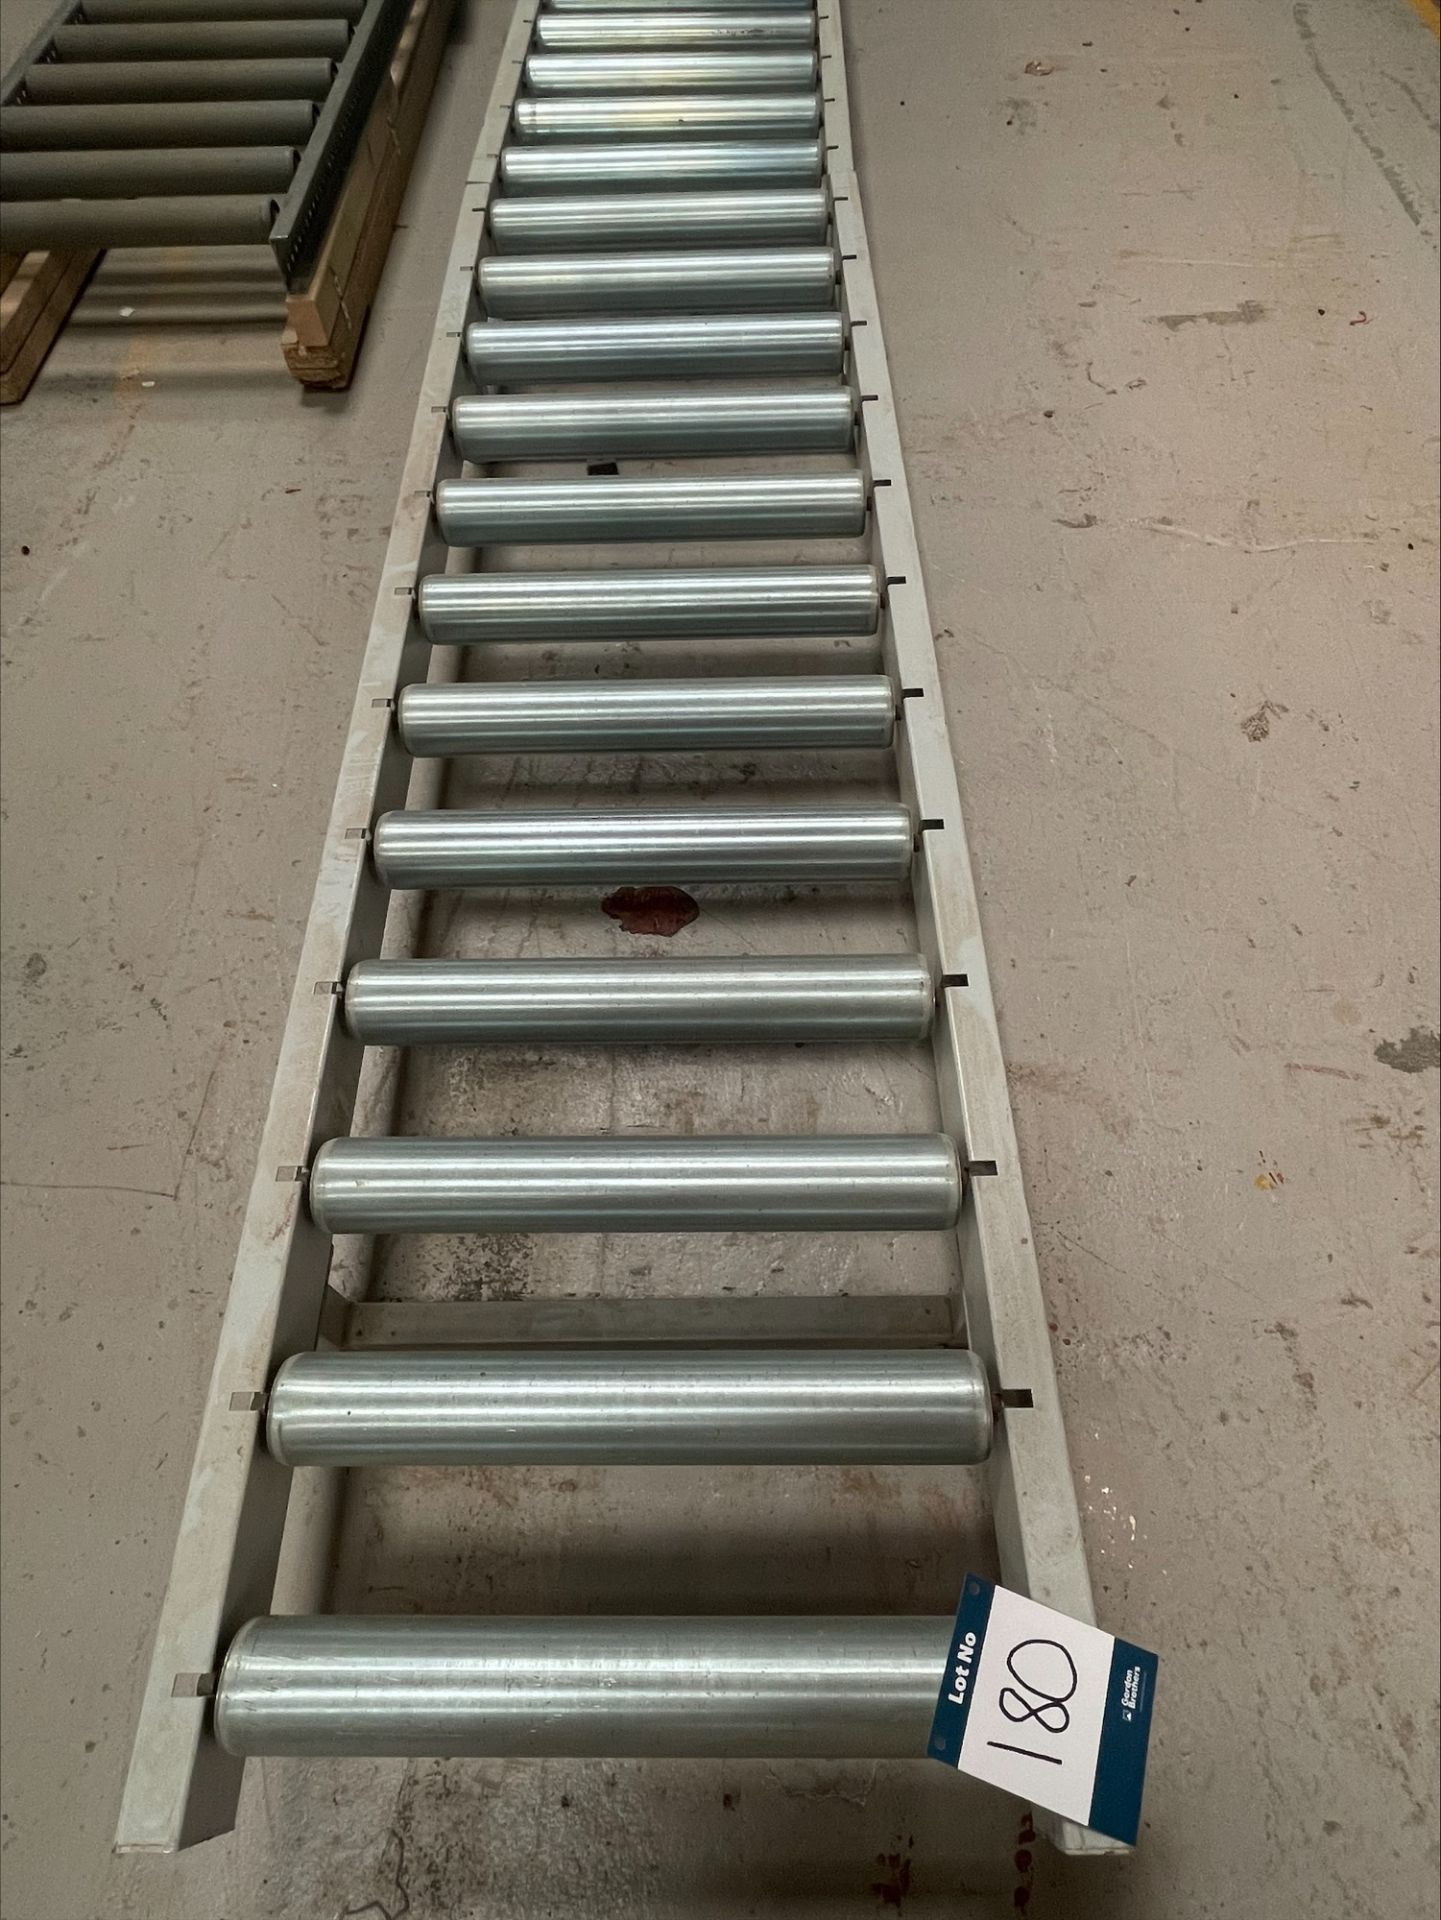 iTech 7 section gravity roller conveyoring, total width: 600mm, total length: 12,020mm, height: - Image 3 of 4